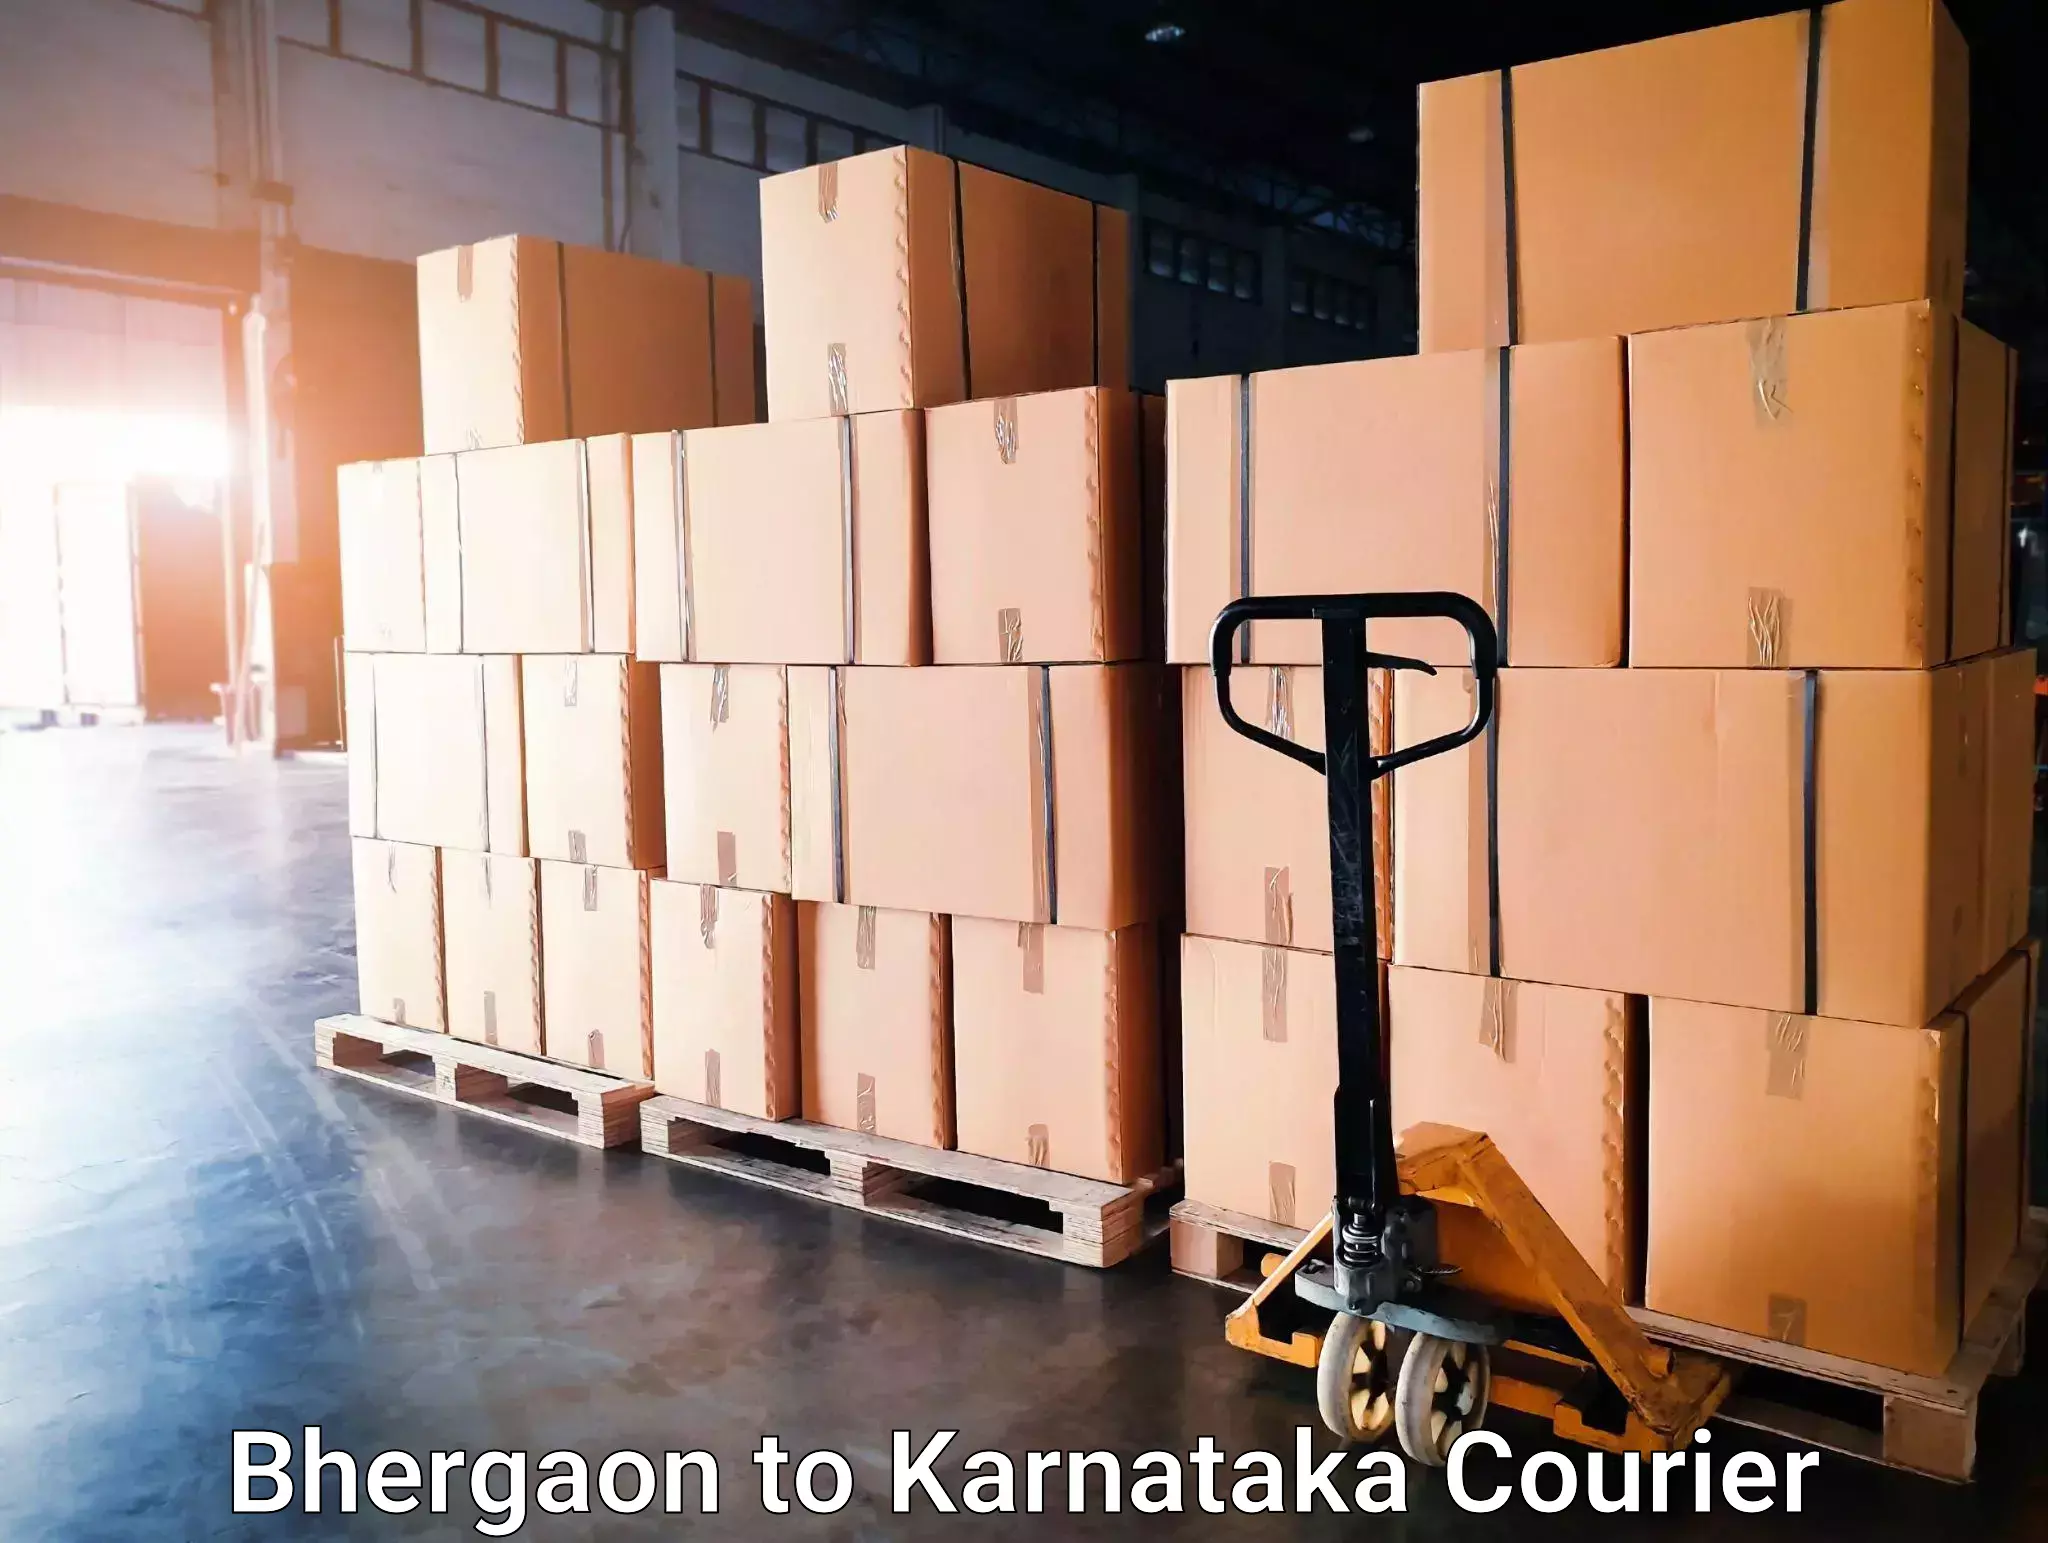 Subscription-based courier Bhergaon to Nanjangud